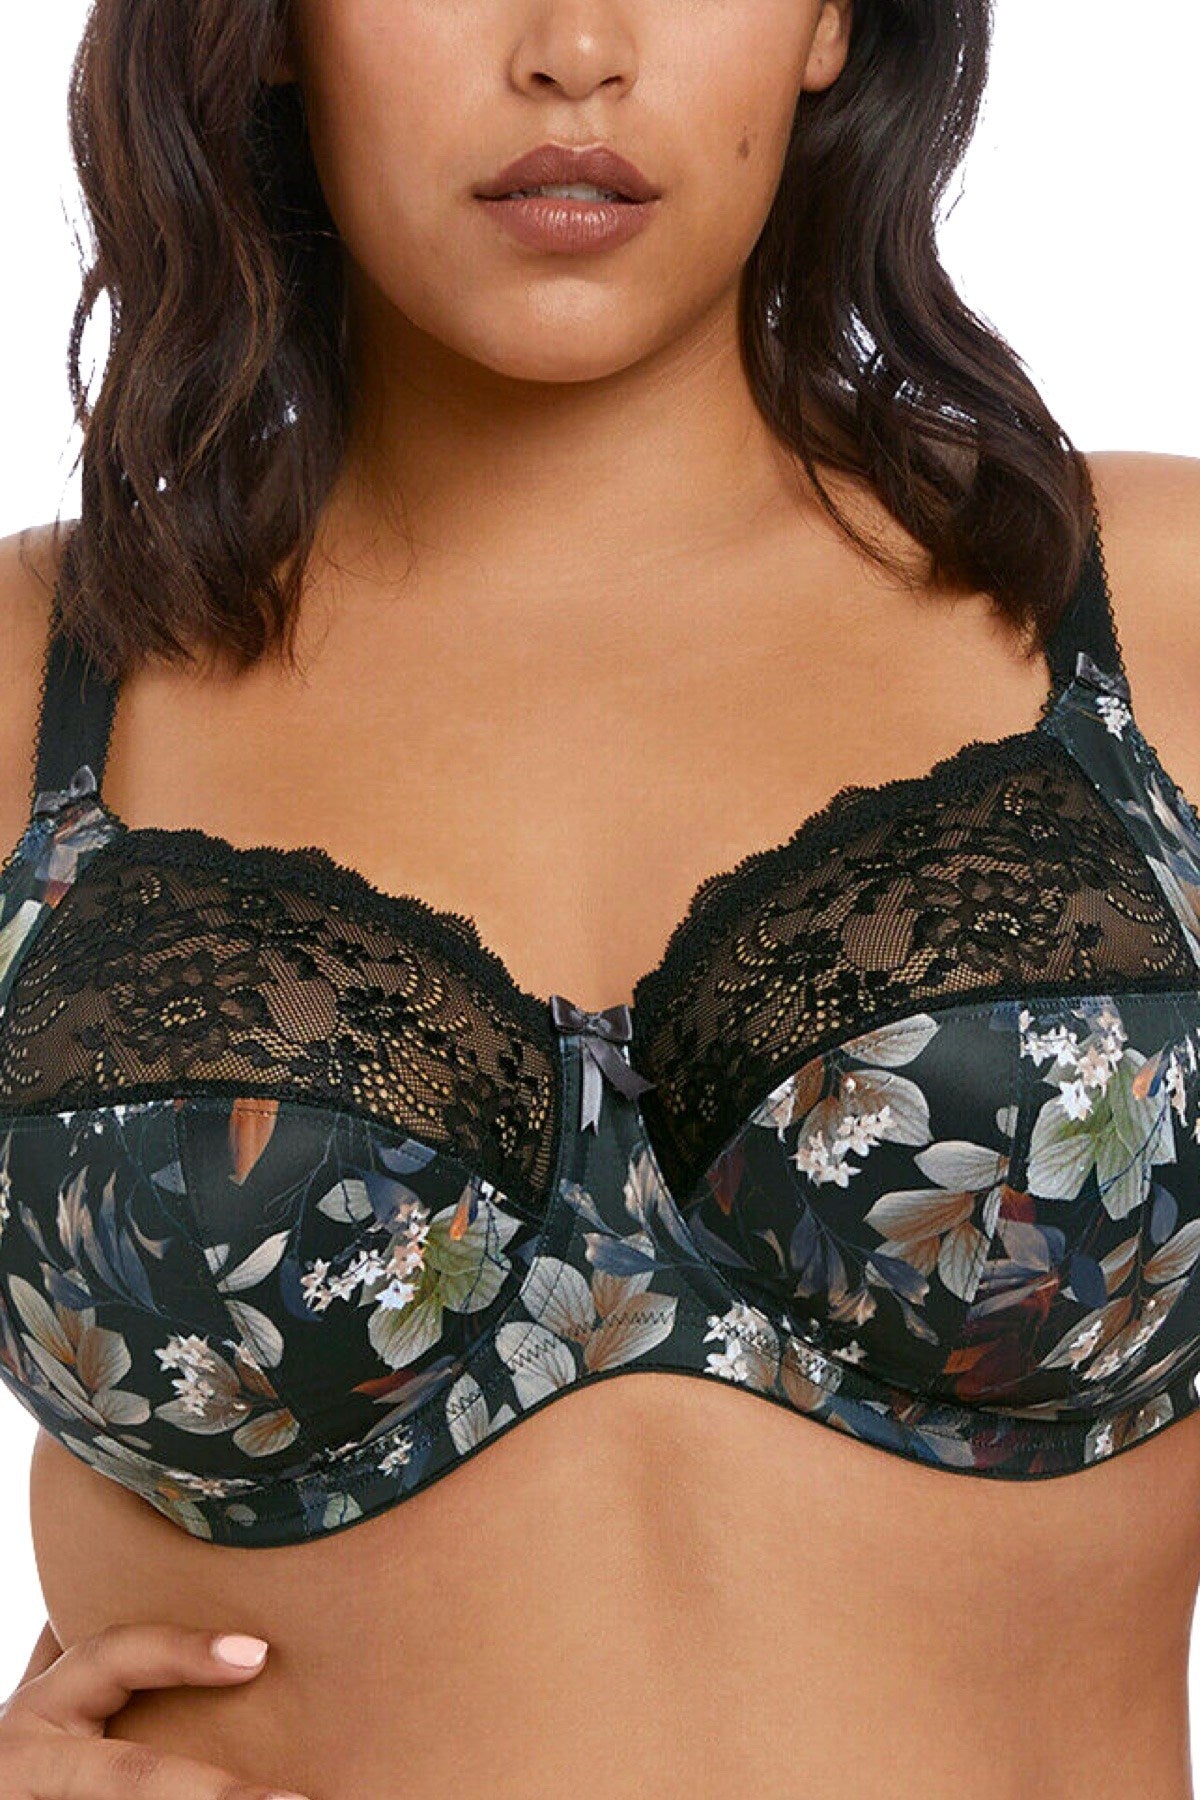 Elomi Womens Morgan Underwire Full Cup Stretch Lace Banded Bra, 36J, Blaze  